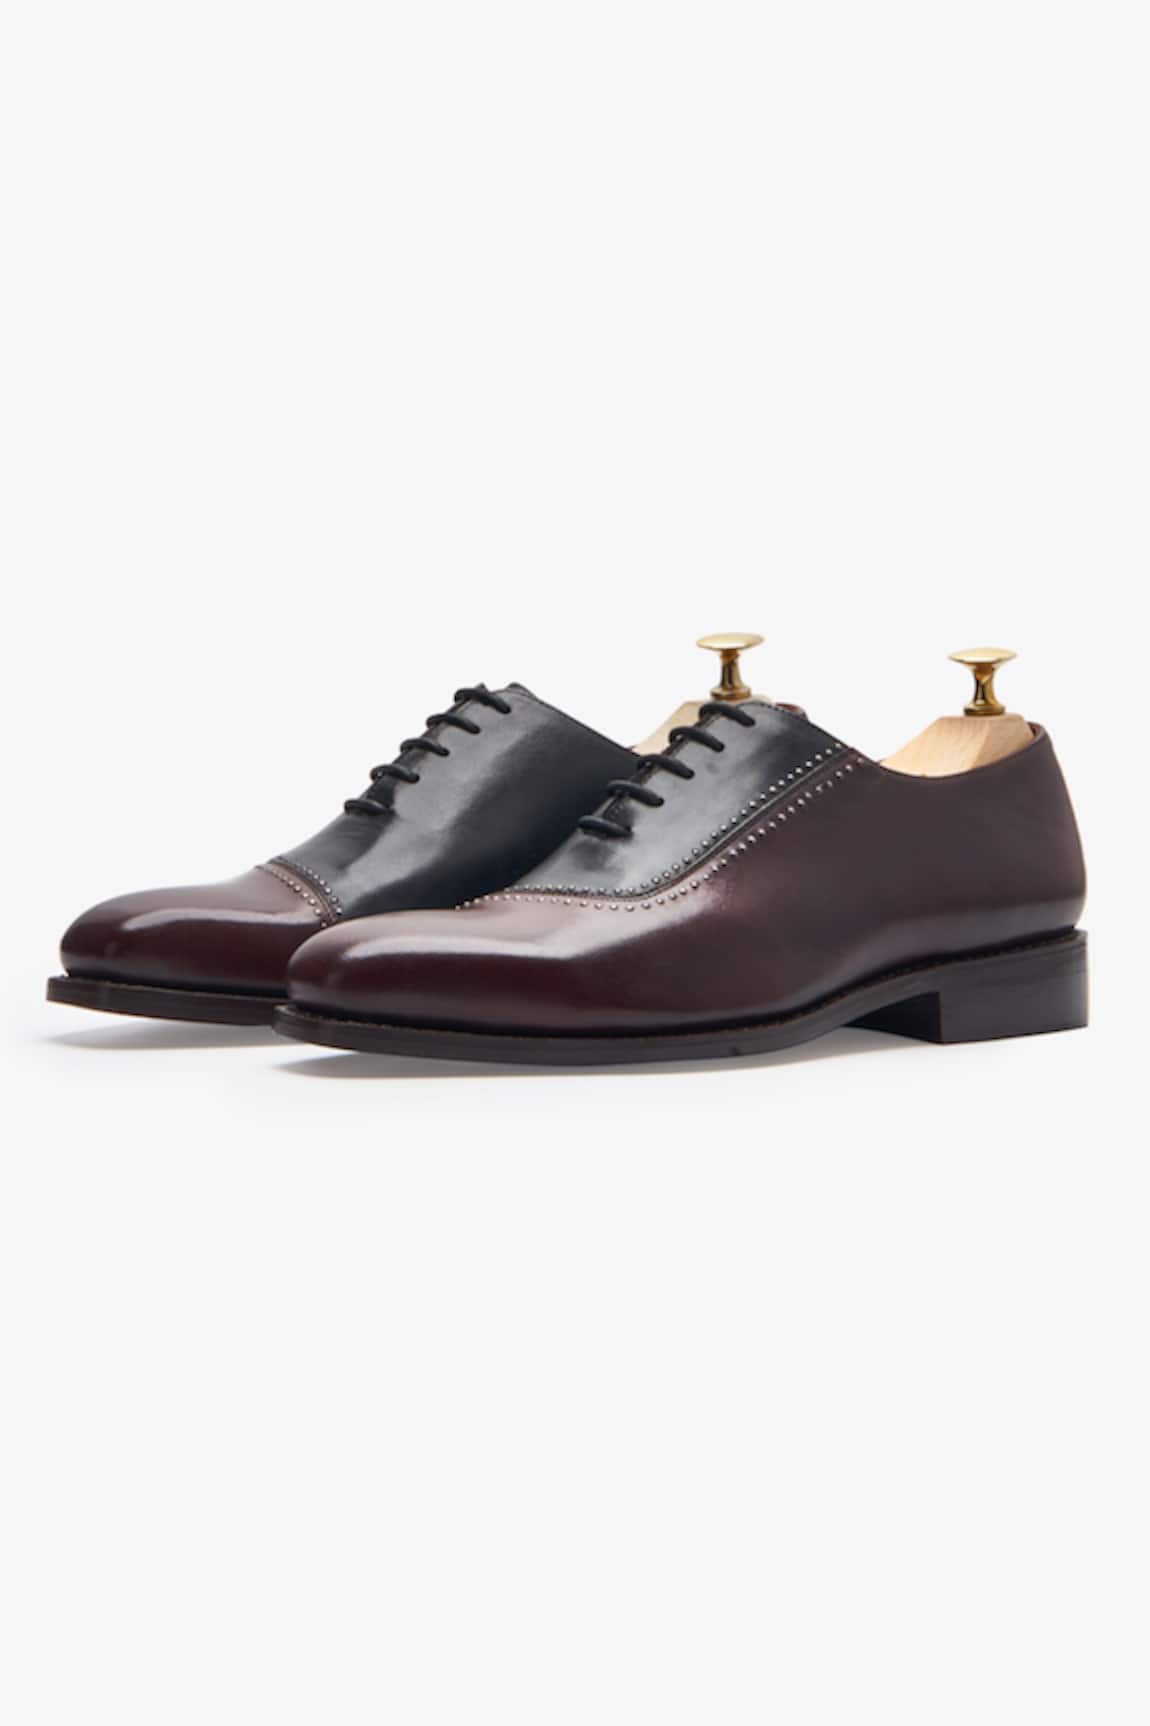 Whitemuds Repton Oxford Shoes